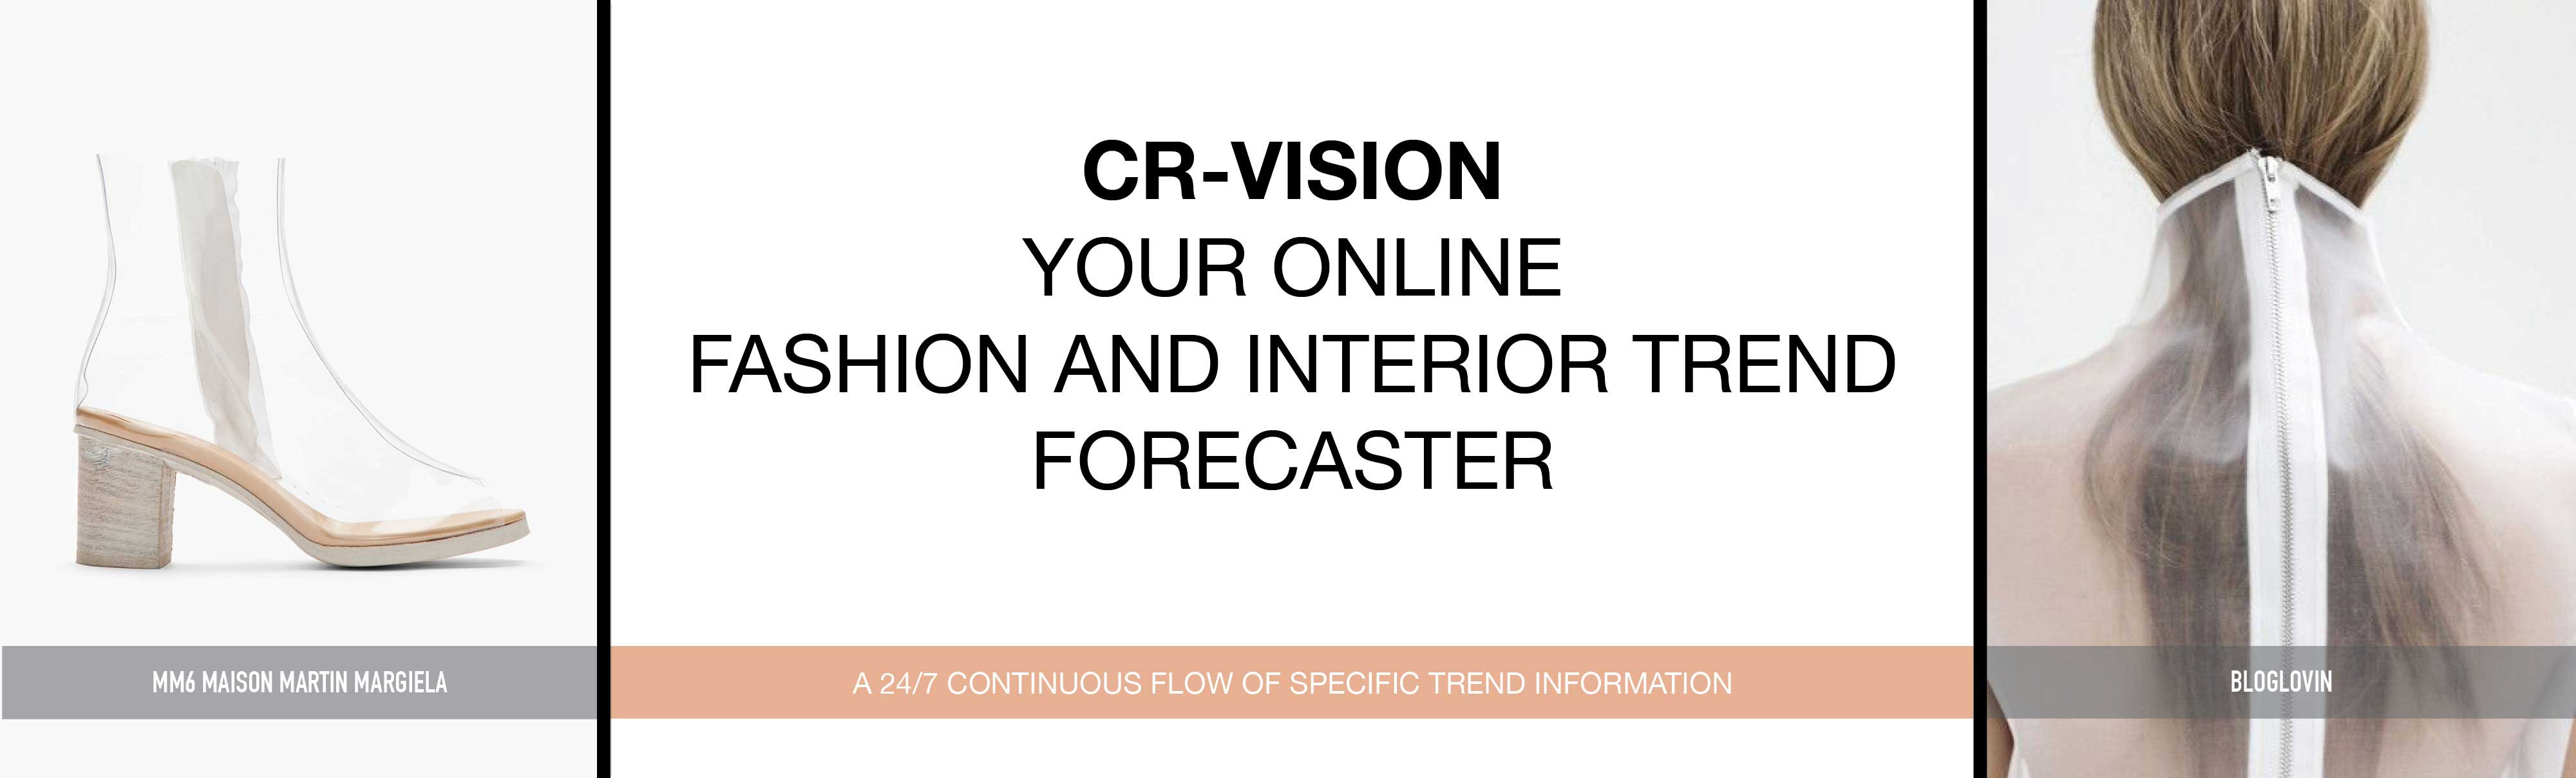 CR-VISION | Online Fashion and Interior